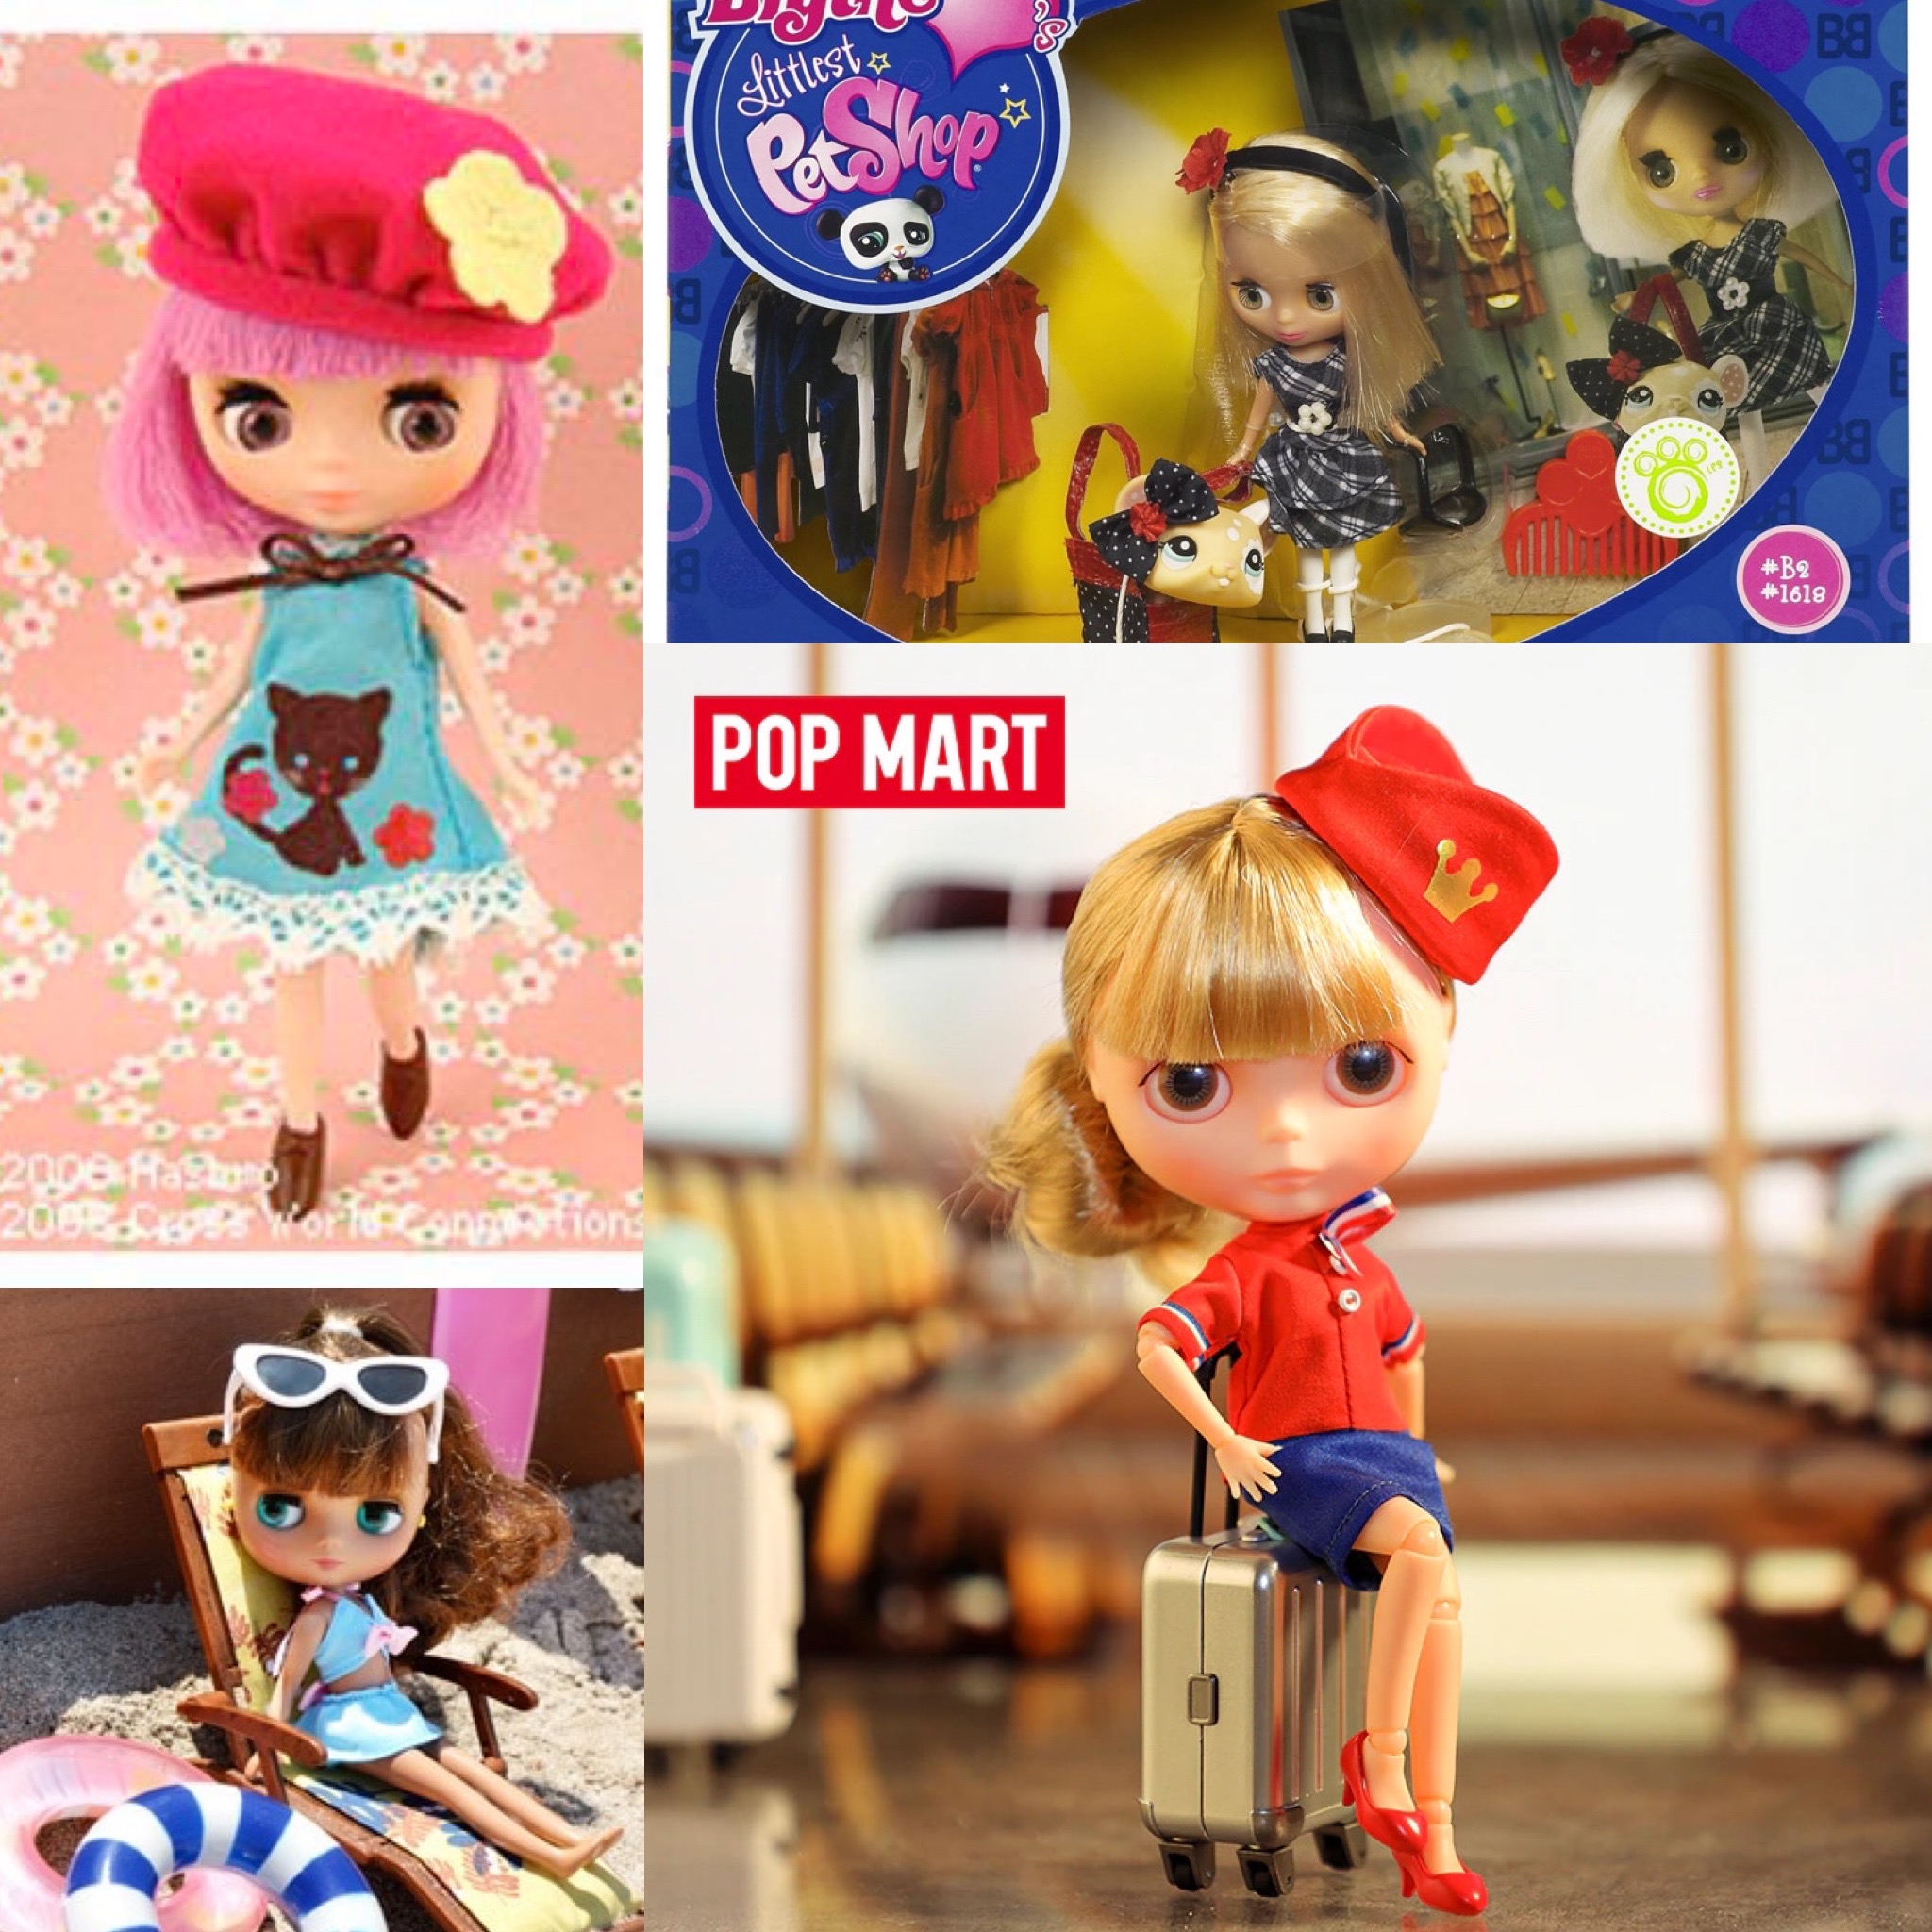 Middie, petite, LPS, and POP MART Blythes